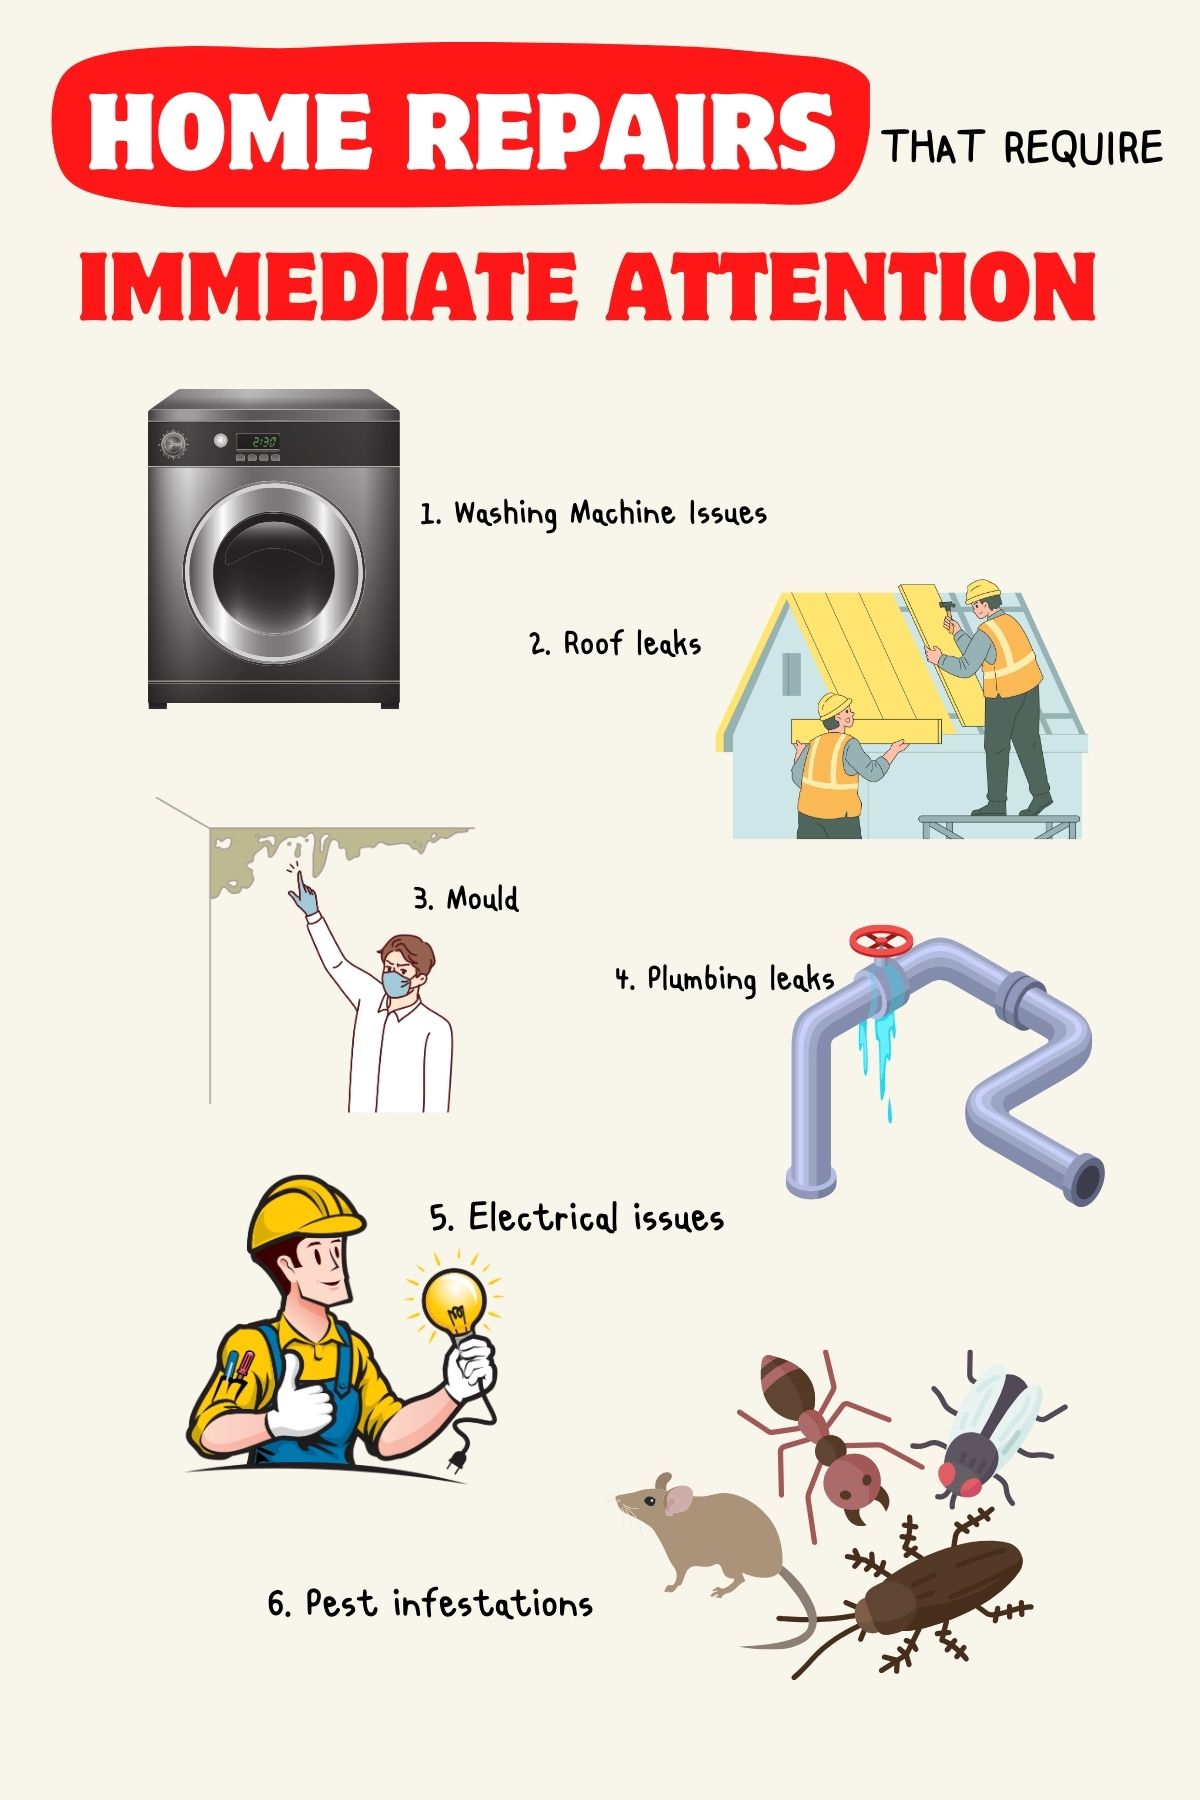 Home repairs that require immediate attention